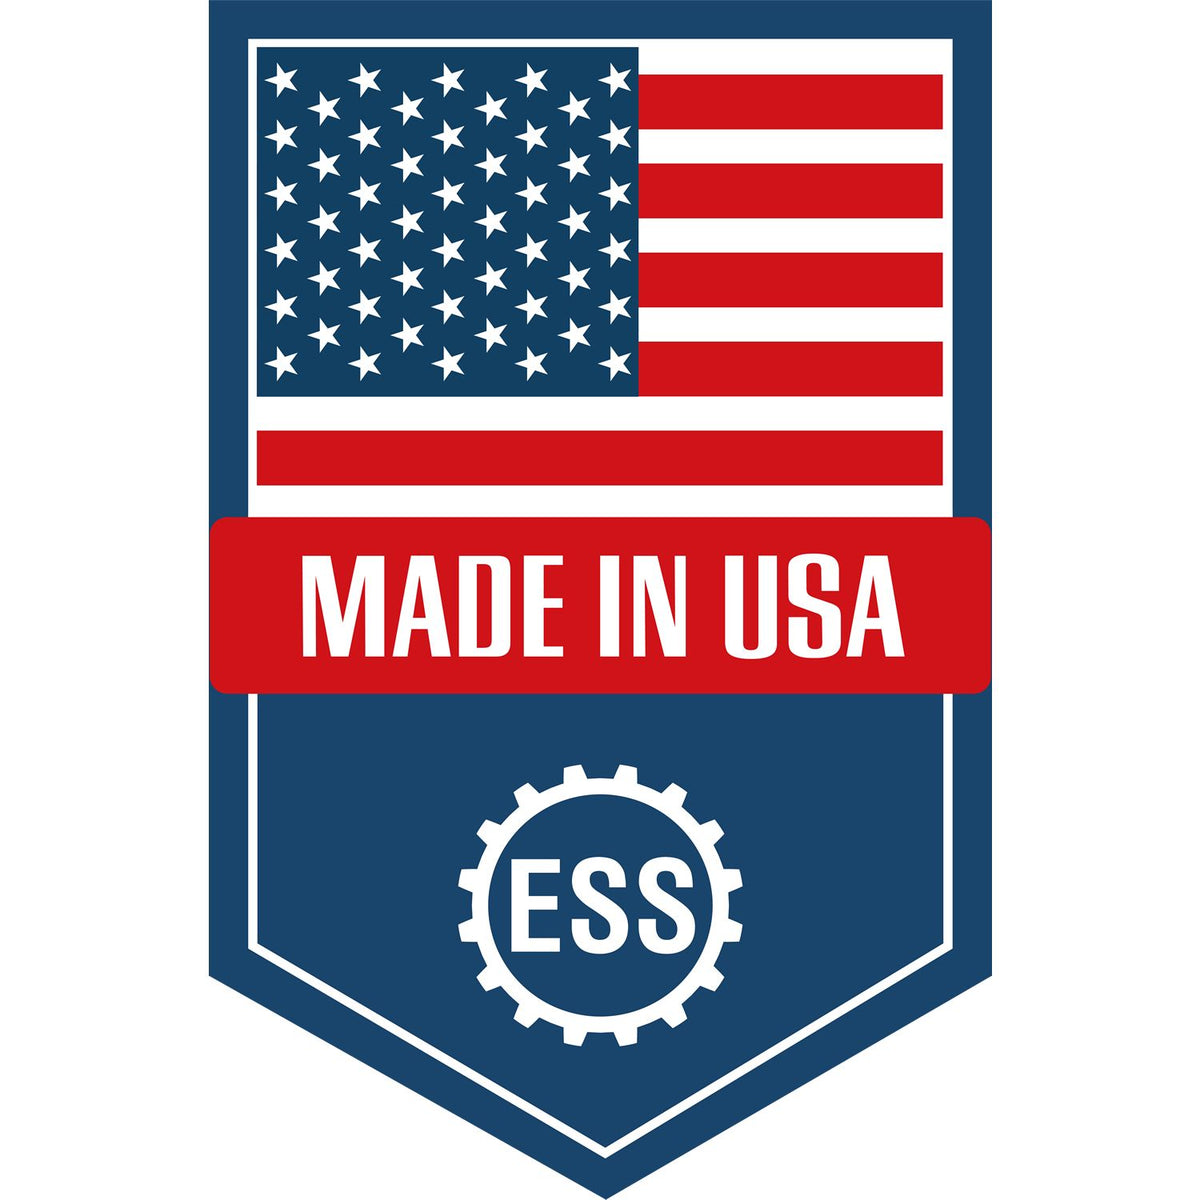 An icon or graphic with an american flag and text reading Made in USA for the Slim Pre-Inked Texas Landscape Architect Seal Stamp